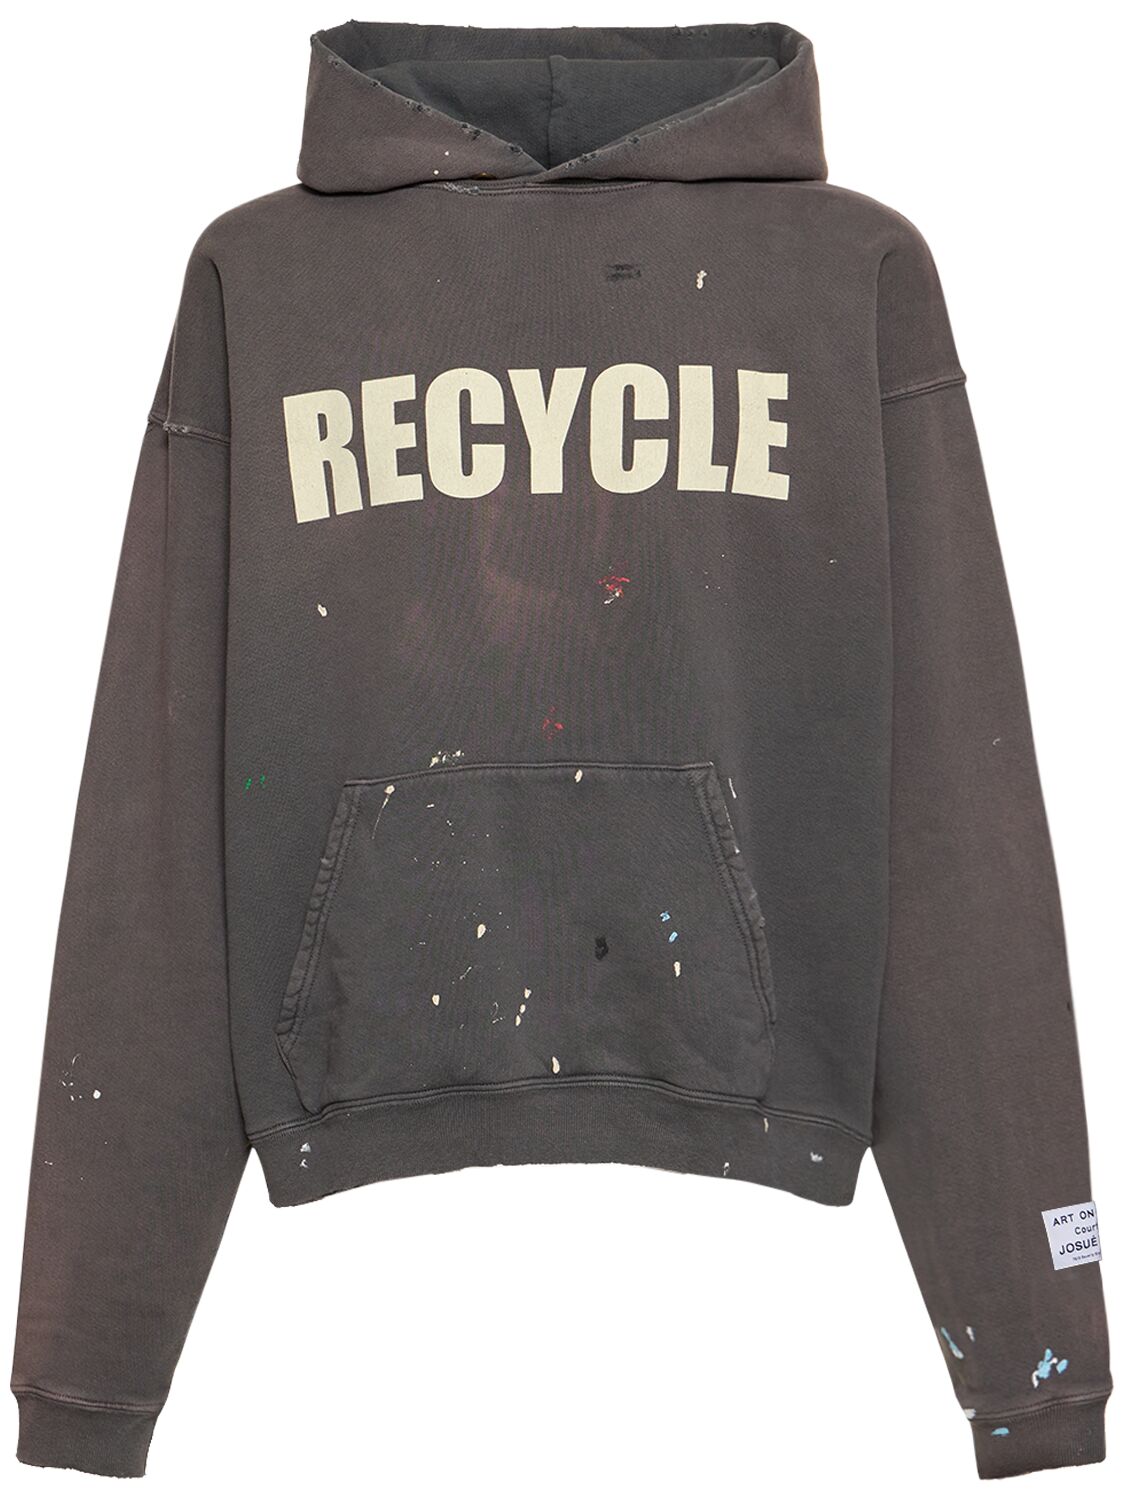 GALLERY DEPT. COTTON RECYCLE LOGO HOODIE